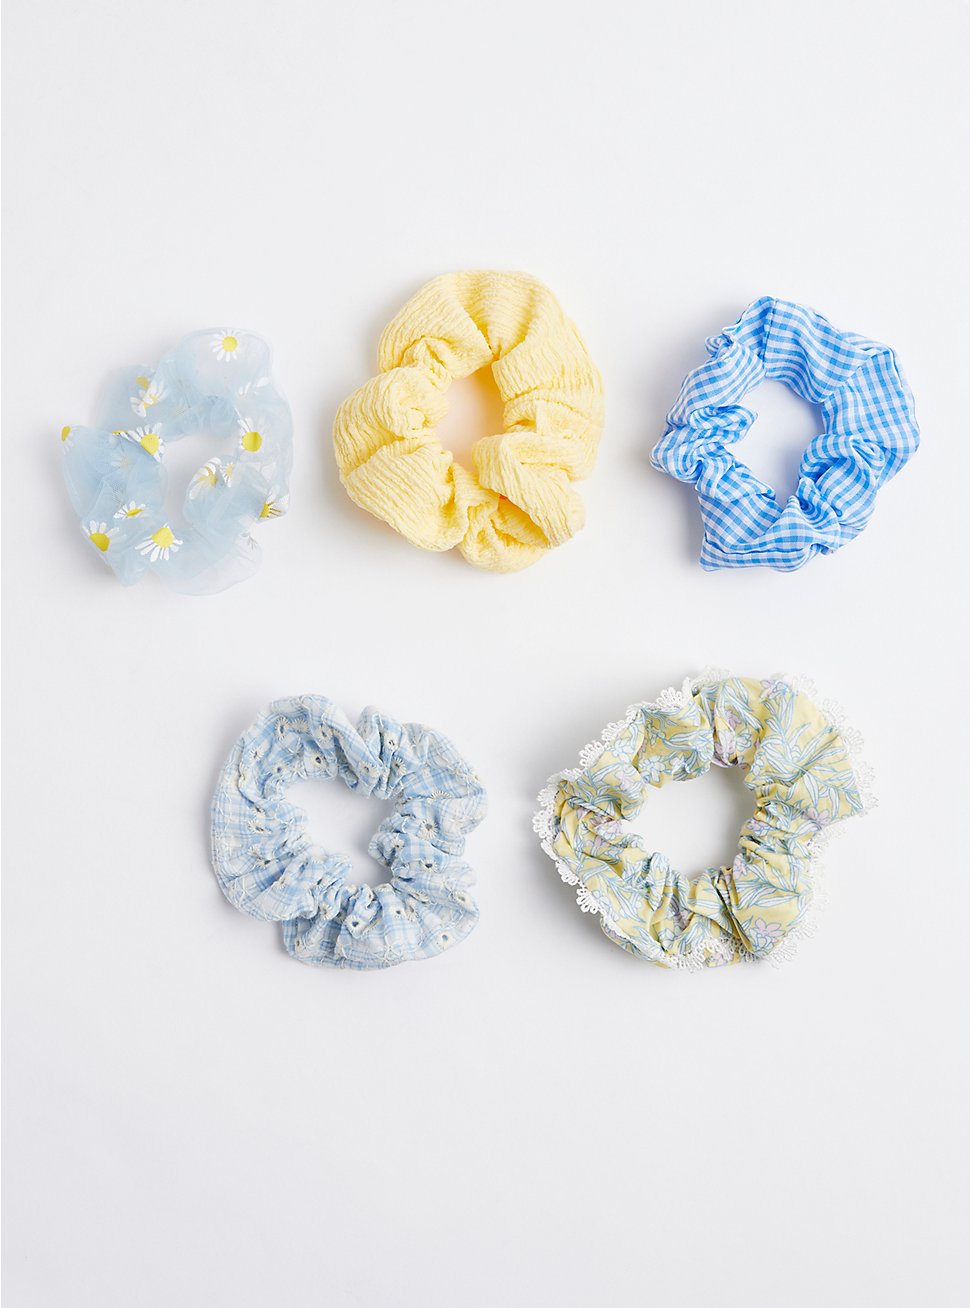 Scrunchie Pack - Blue & Yellow, , hi-res